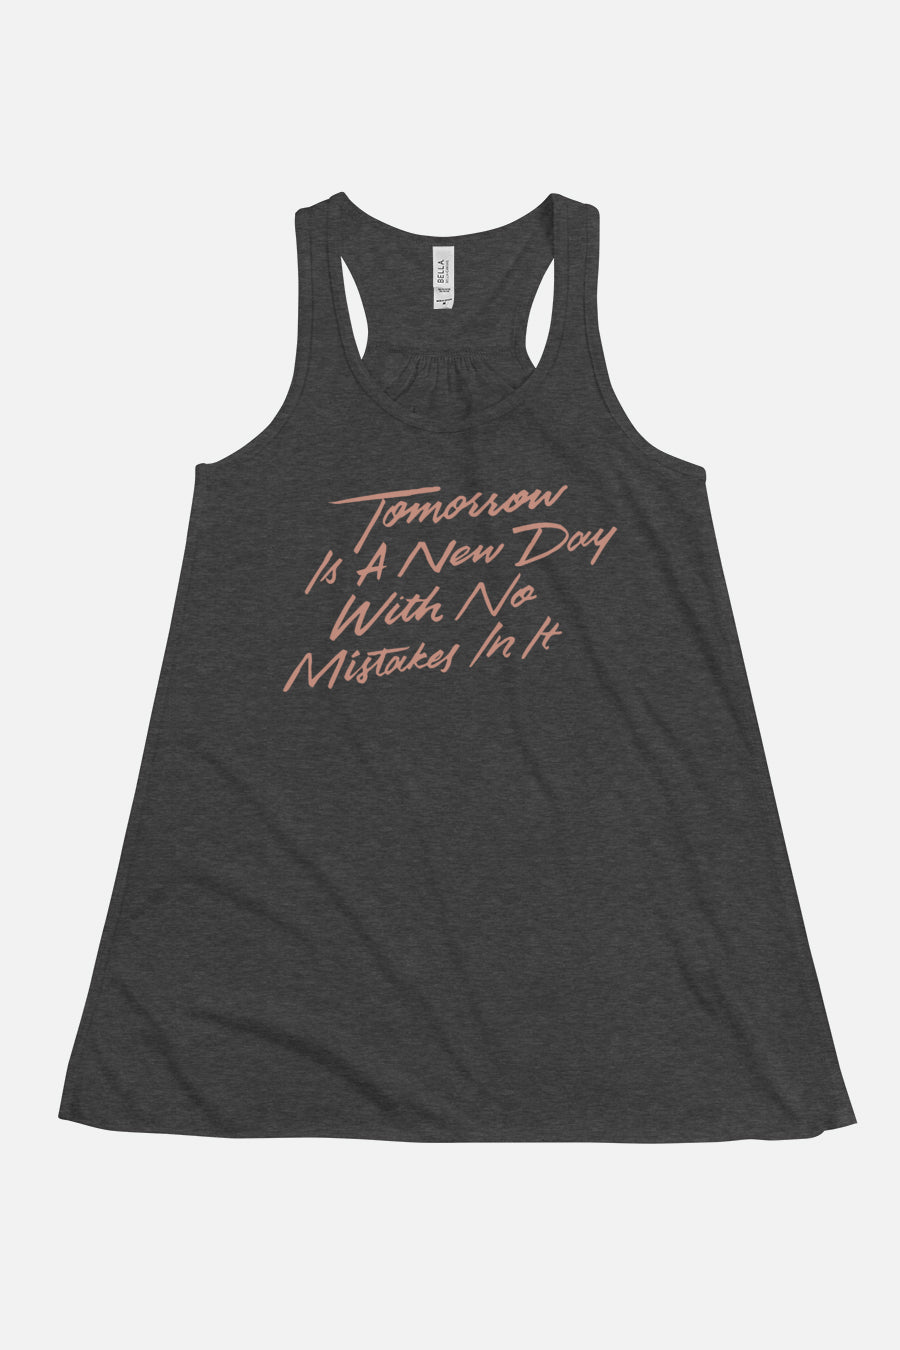 Tomorrow is a New Day Fitted Flowy Racerback Tank | Anne of Green Gables